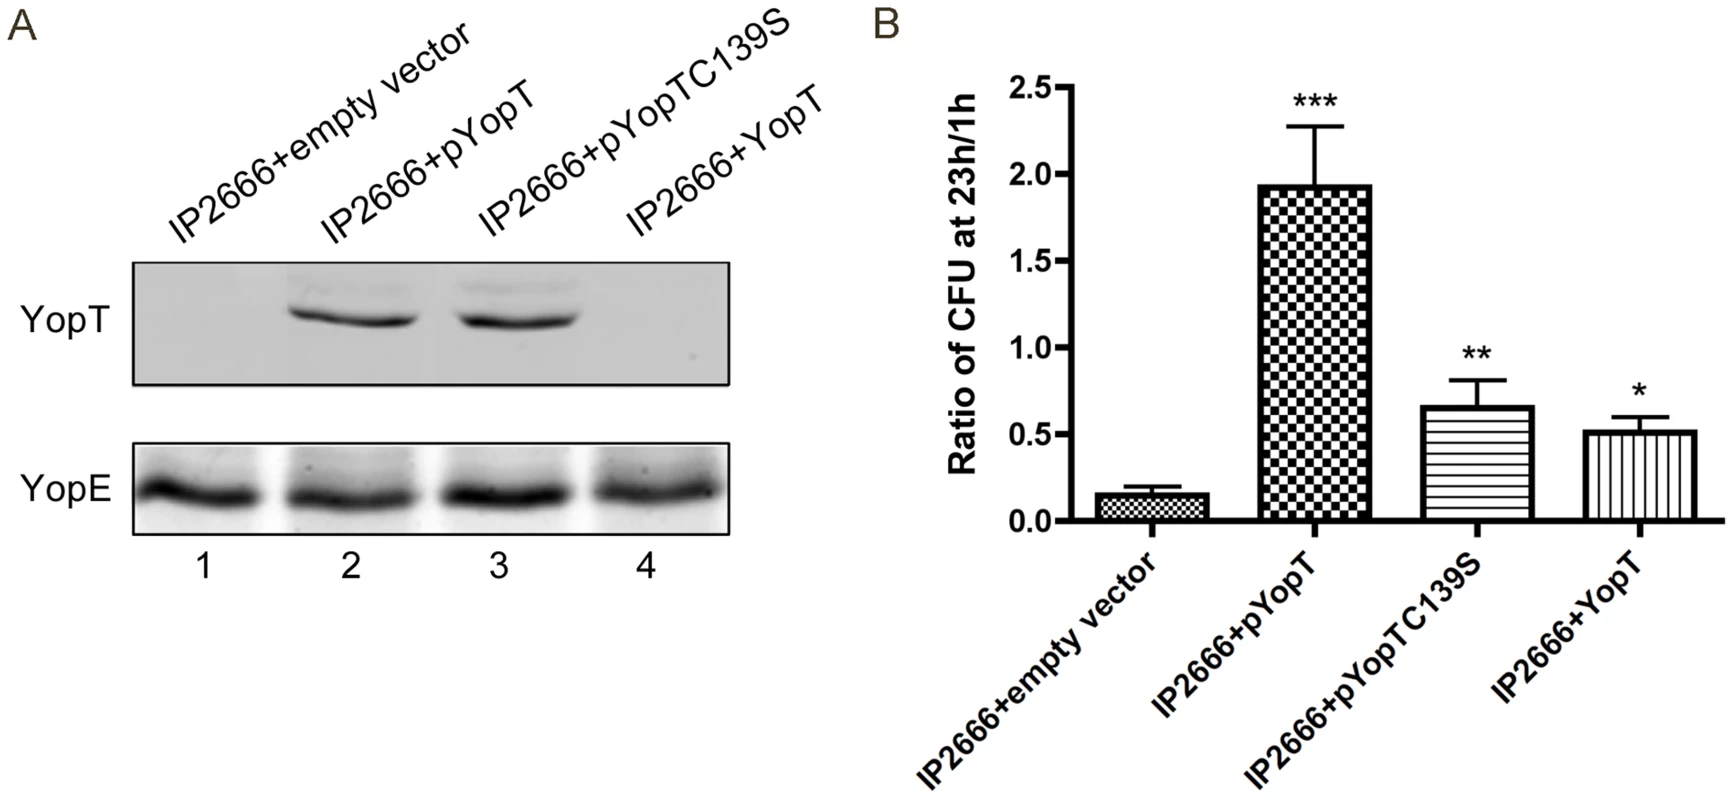 Measurement of YopT production and survival in macrophages by different <i>Y. pseudotuberculosis</i> strains.